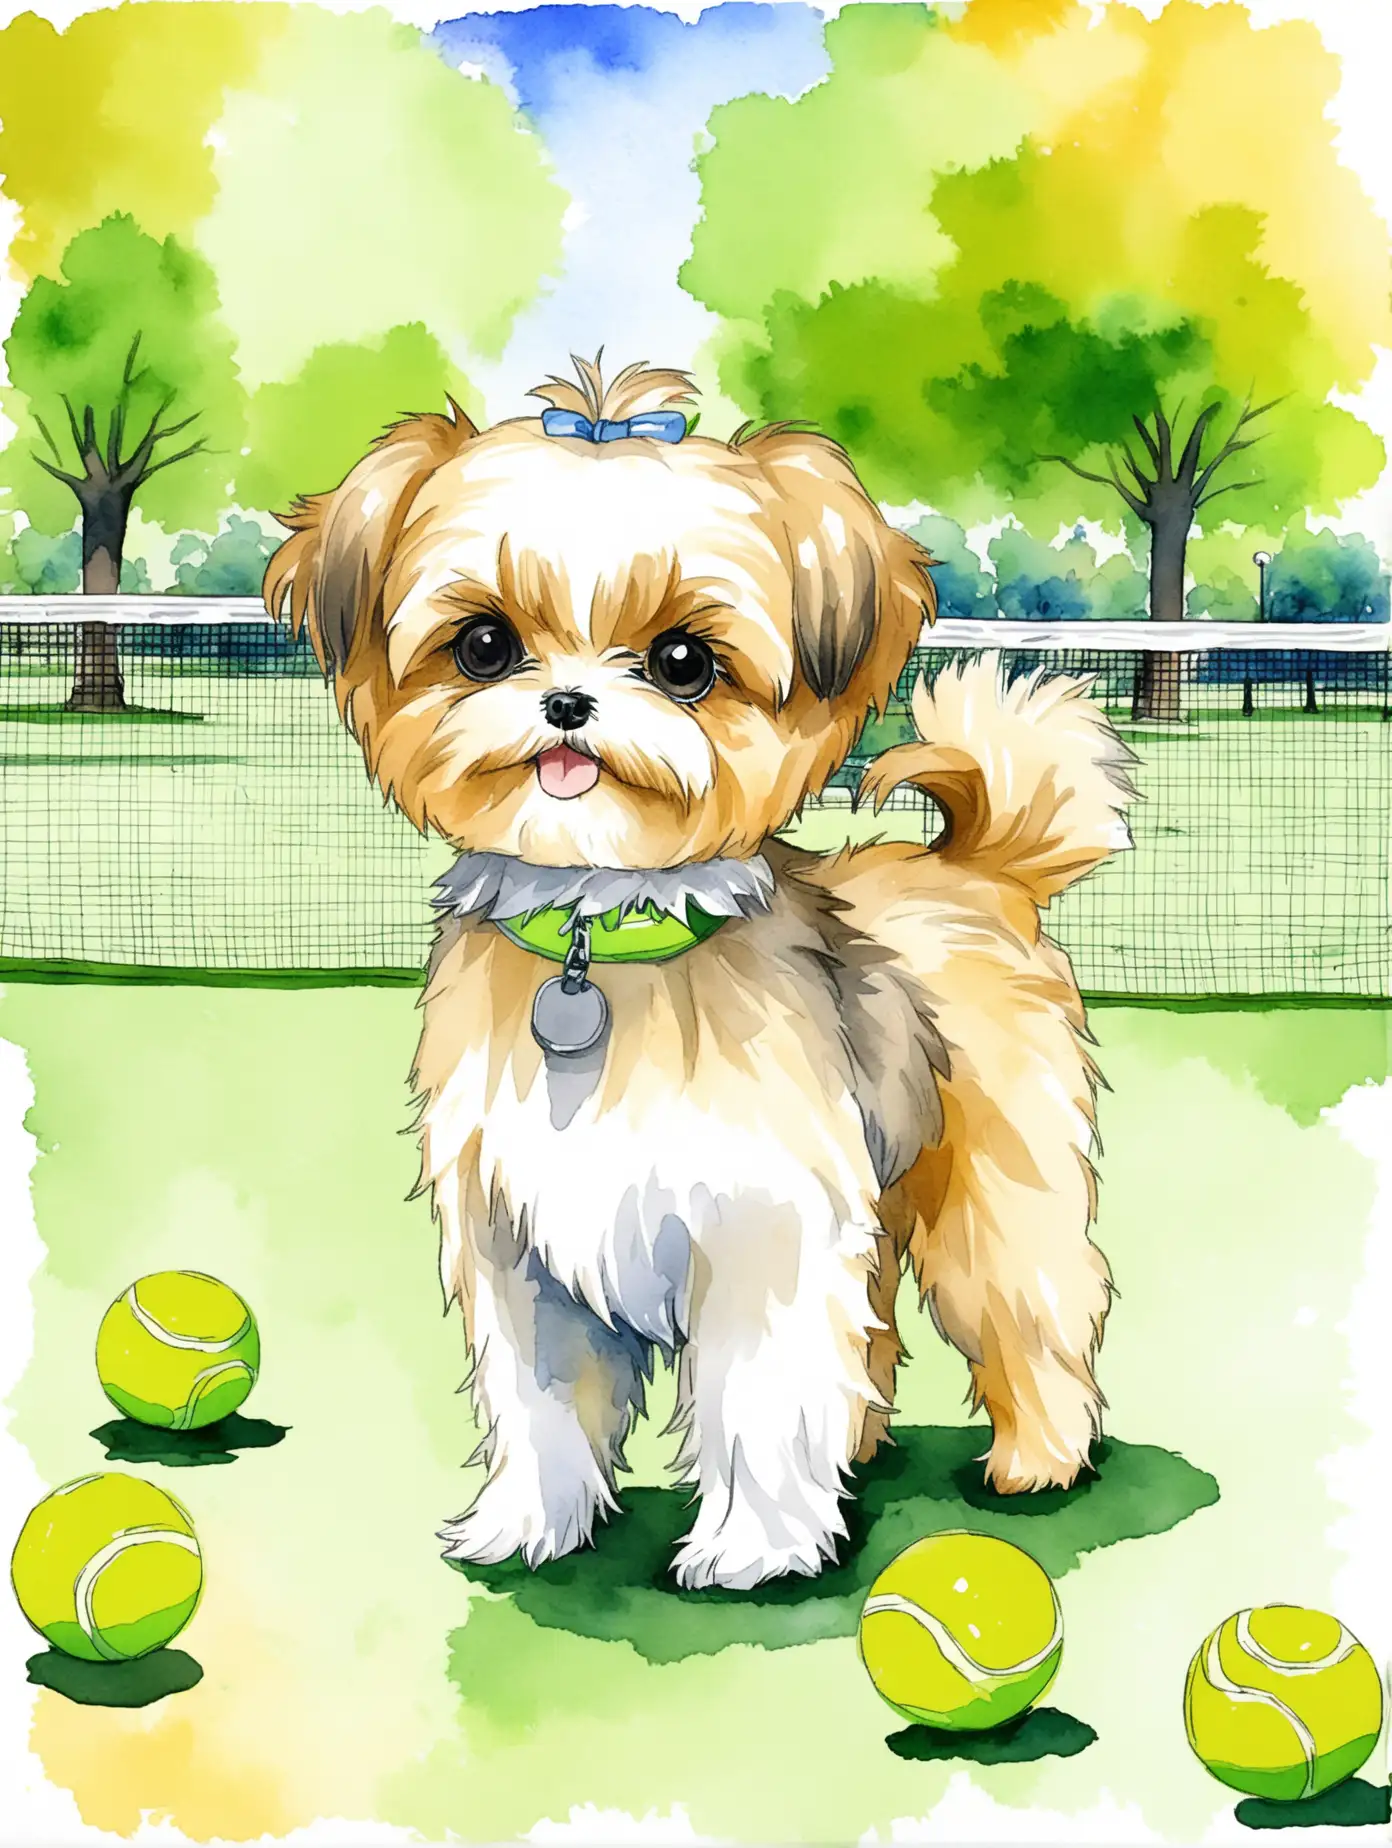 Anime Style Cream Shorkie with Green Tennis Balls in Watercolor Park